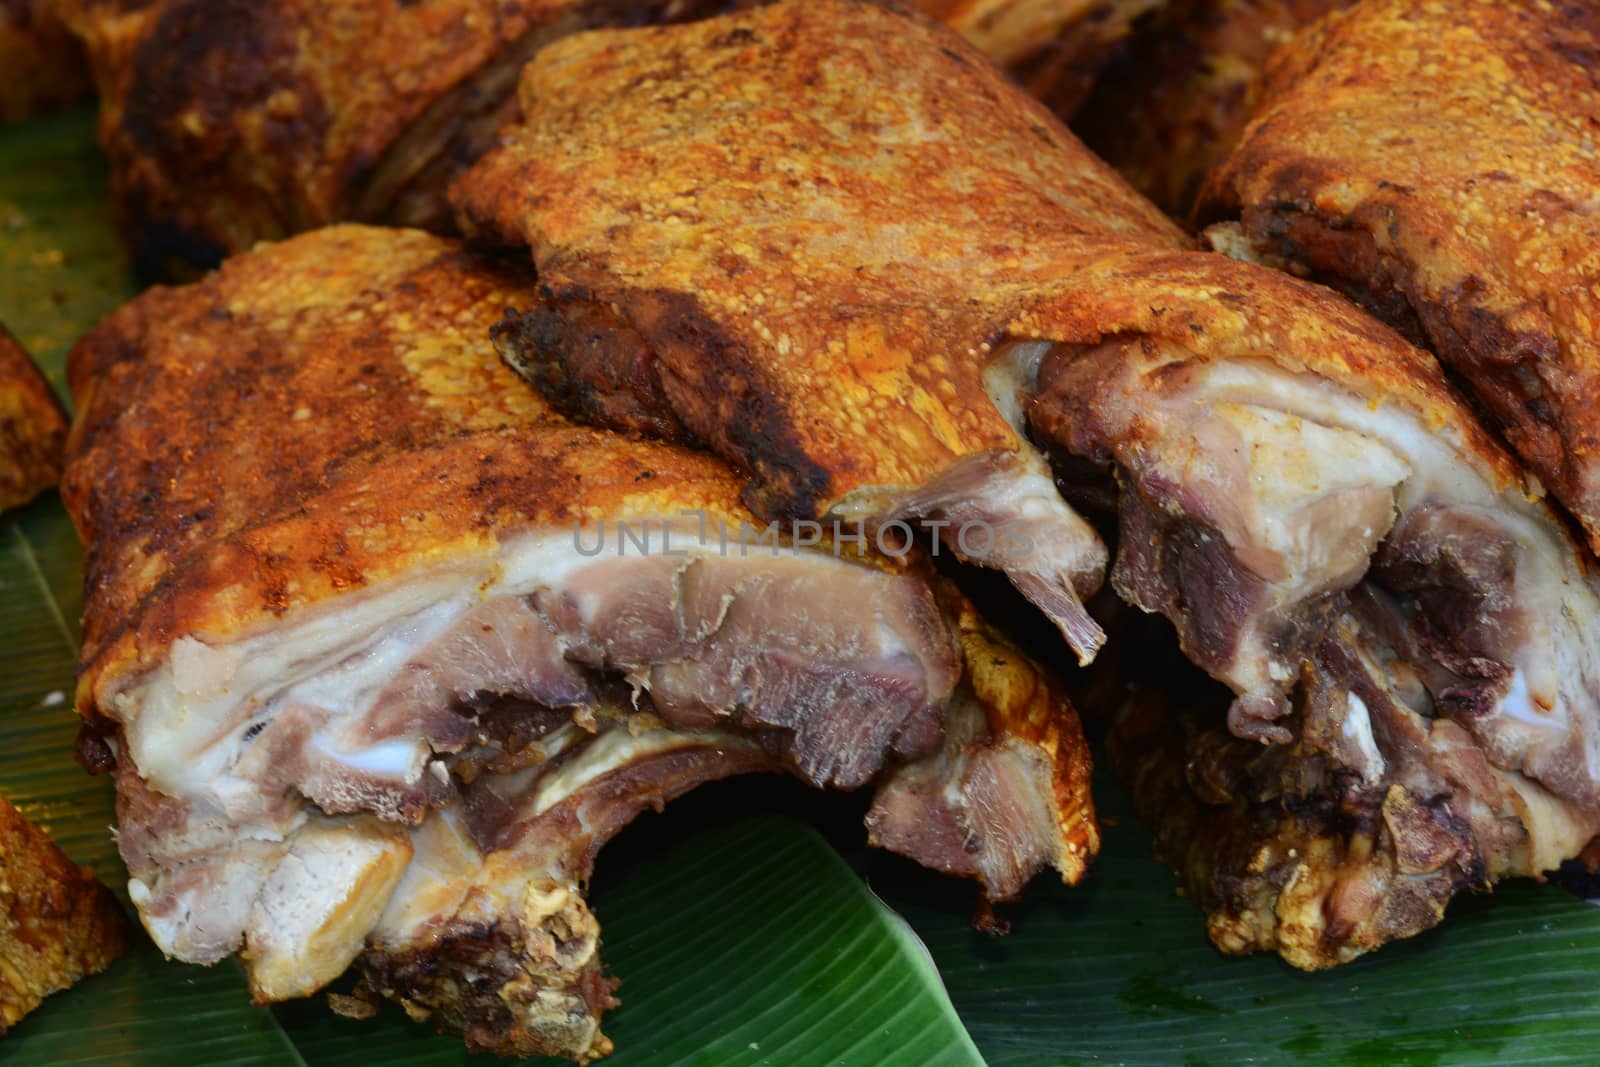 Soft focus of Trang Moo Yang, Roast Pork in Trang, Thailand, The Roasted Pork is rich in its flavor with a thin and crispy pork skin.